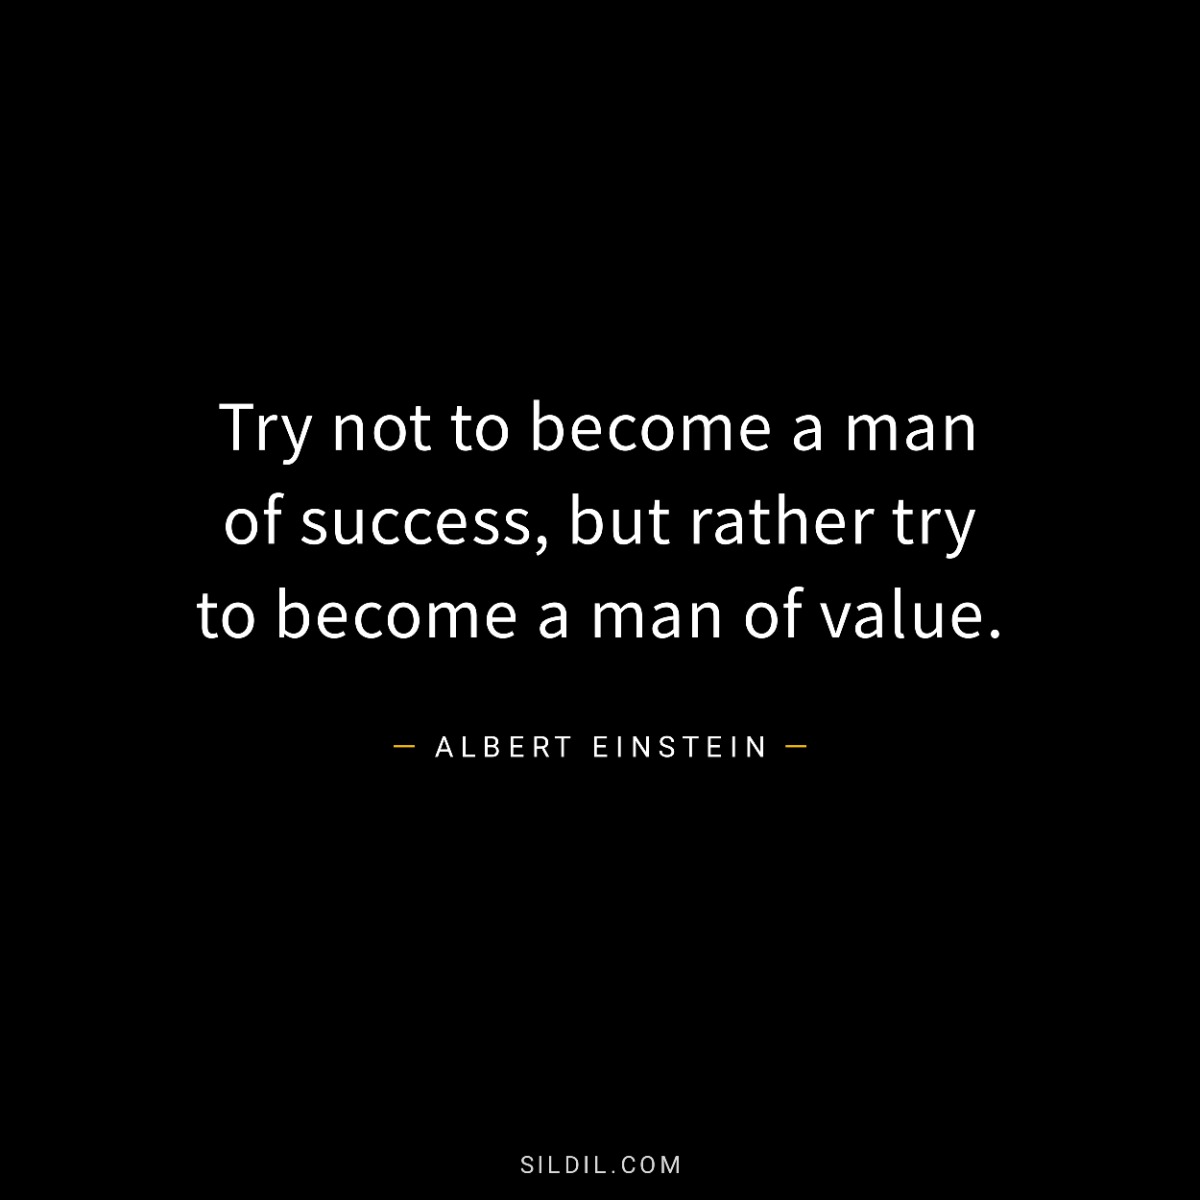 Try not to become a man of success, but rather try to become a man of value.